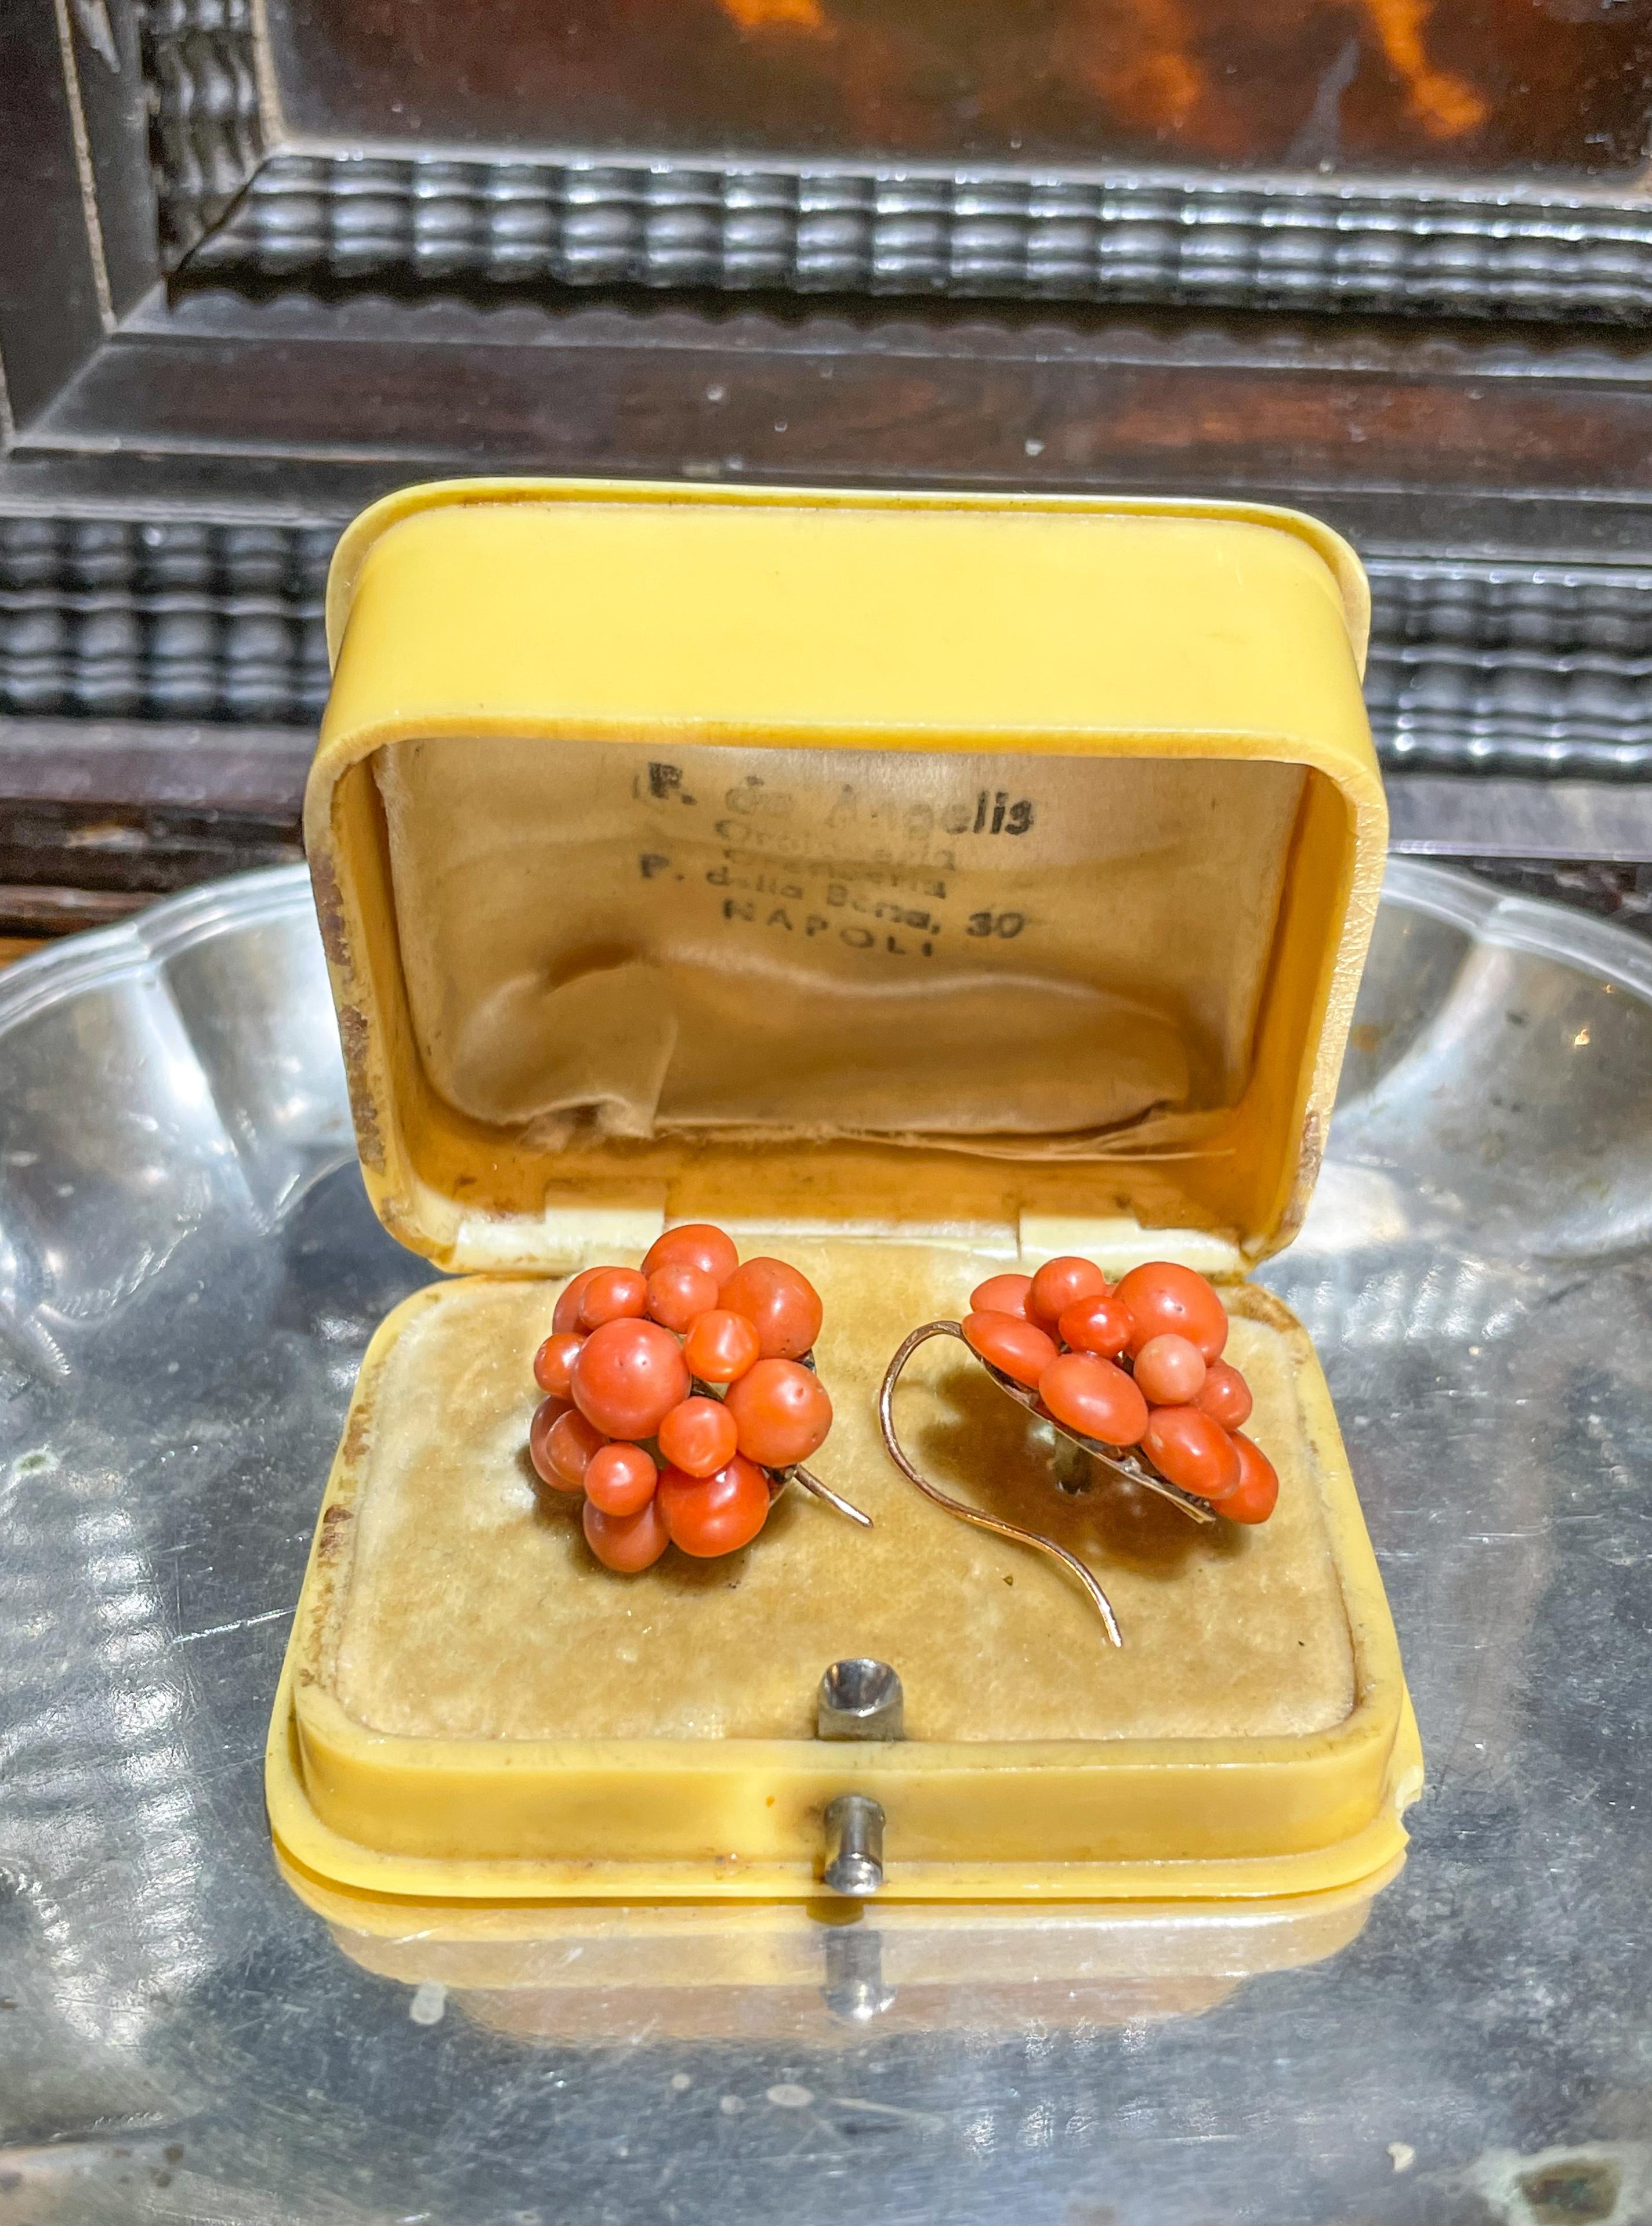 19th century Italian Coral earrings.u2028
Gold with French hallmarks (head of eagle=750 gold).u2028
Nineteenth century.
Height 2.1cmu2028
Length 2.1cm
Earrings in good condition.u2028

They have been checked and consolidated by our trusted